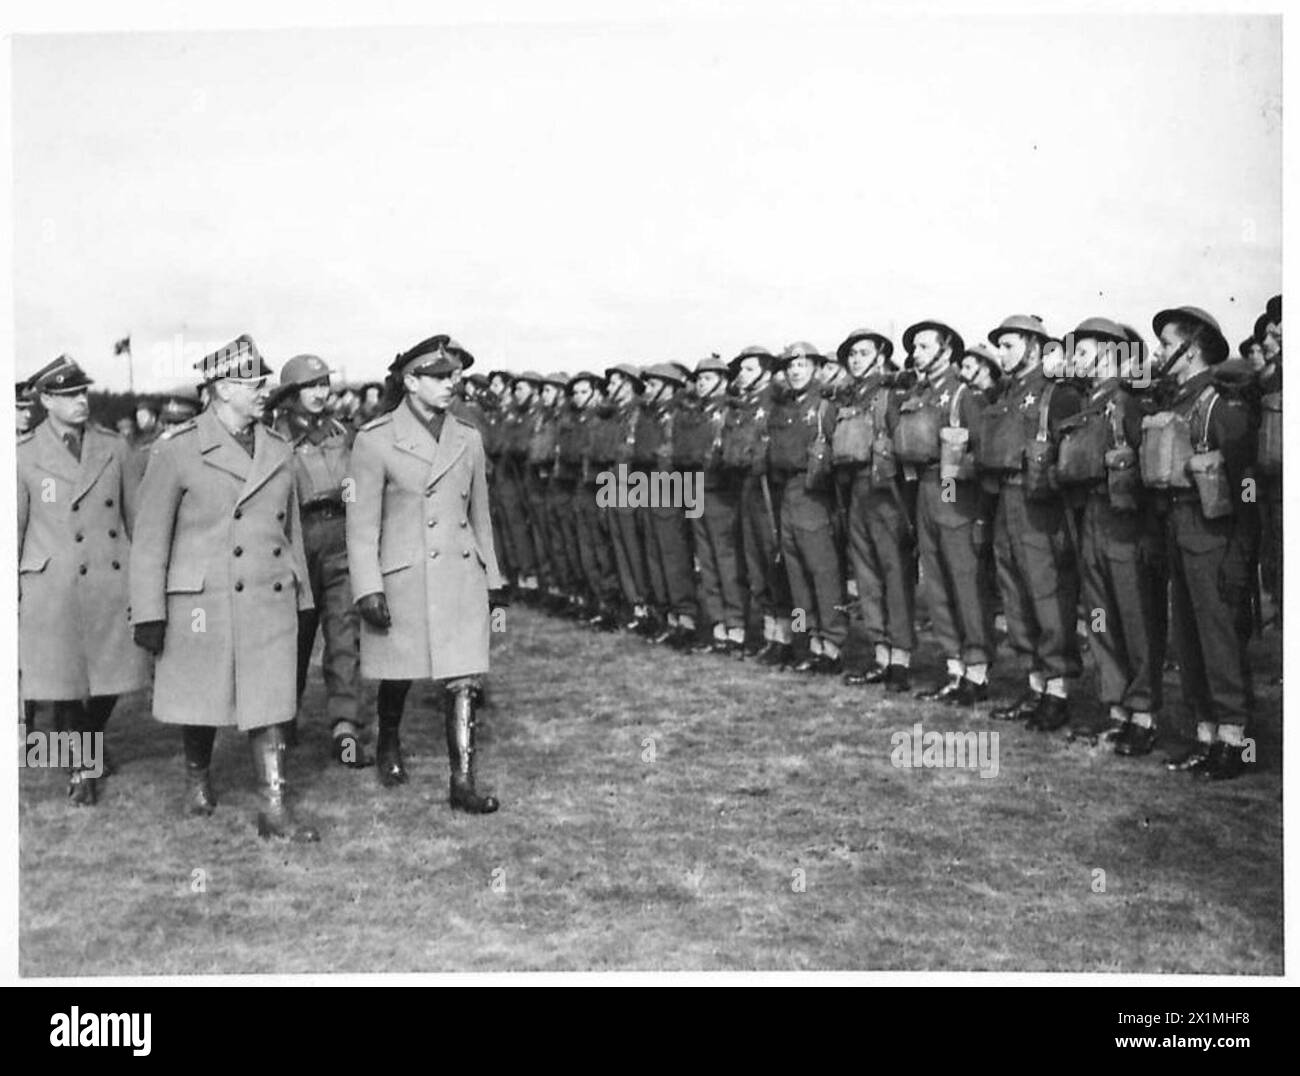 THE POLISH ARMY IN BRITAIN, 1940-1947 - King George VI and General Władysław Sikorski, the Polish Prime Minister and the C-in-C of the Polish Armed Forces, inspecting troops of the 1st Polish Corps at Glamis, 8 March 1941.Photograph taken during the Royal tour of Scotland. Black and white , British Army, Polish Army, Polish Armed Forces in the West, 1st Corps, George VI, King, Sikorski, Władysław Stock Photo